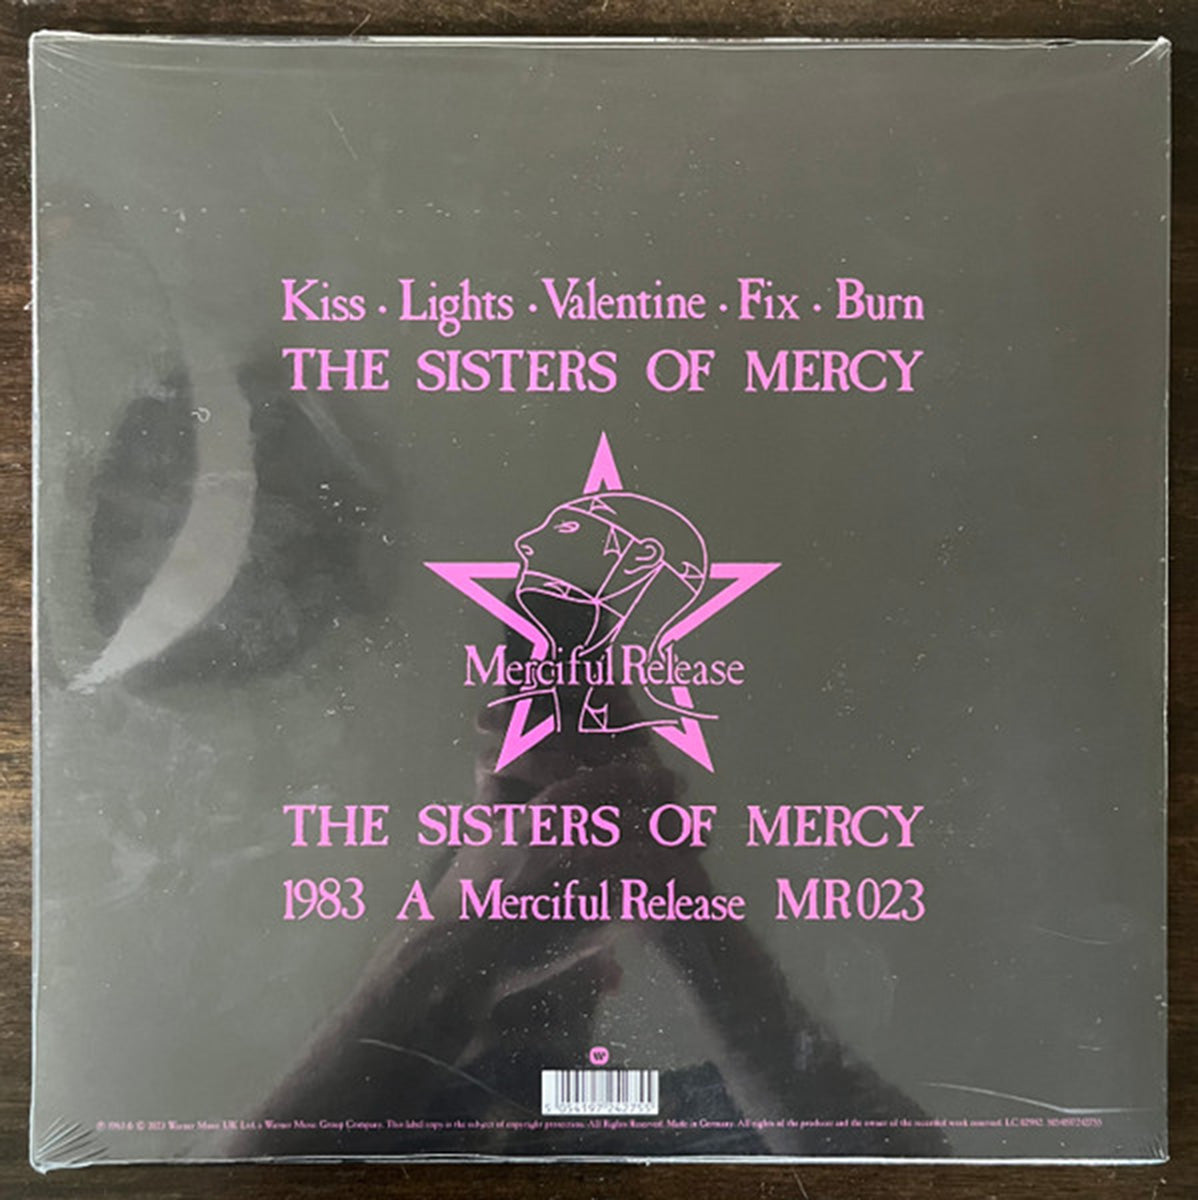 The Sisters Of Mercy – The Reptile House - Grey Smokey Vinyl, Sealed RDS Pressing